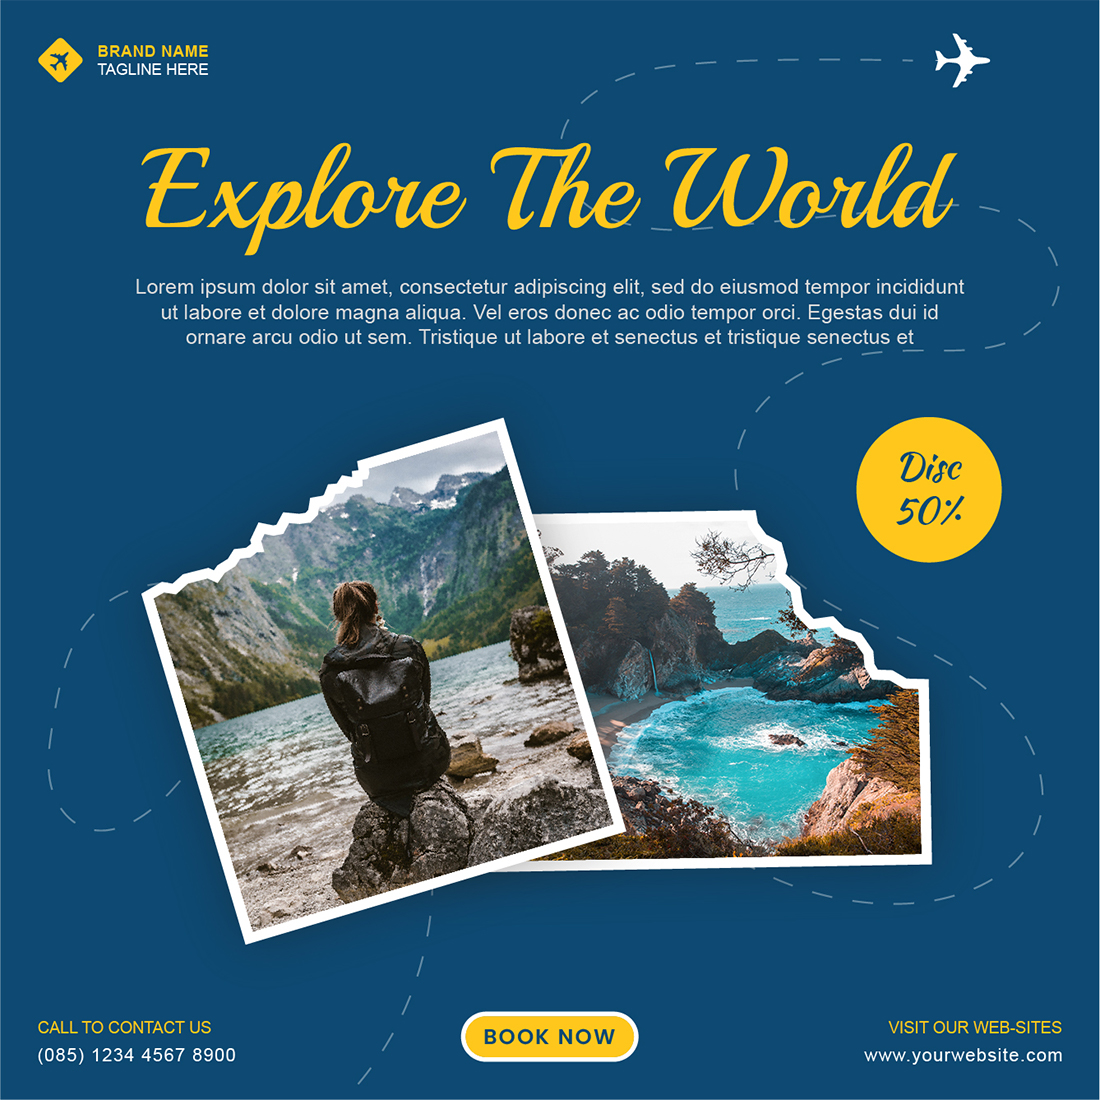 Tour & Travel Agency Social Media Post Templates preview with 2 photos.